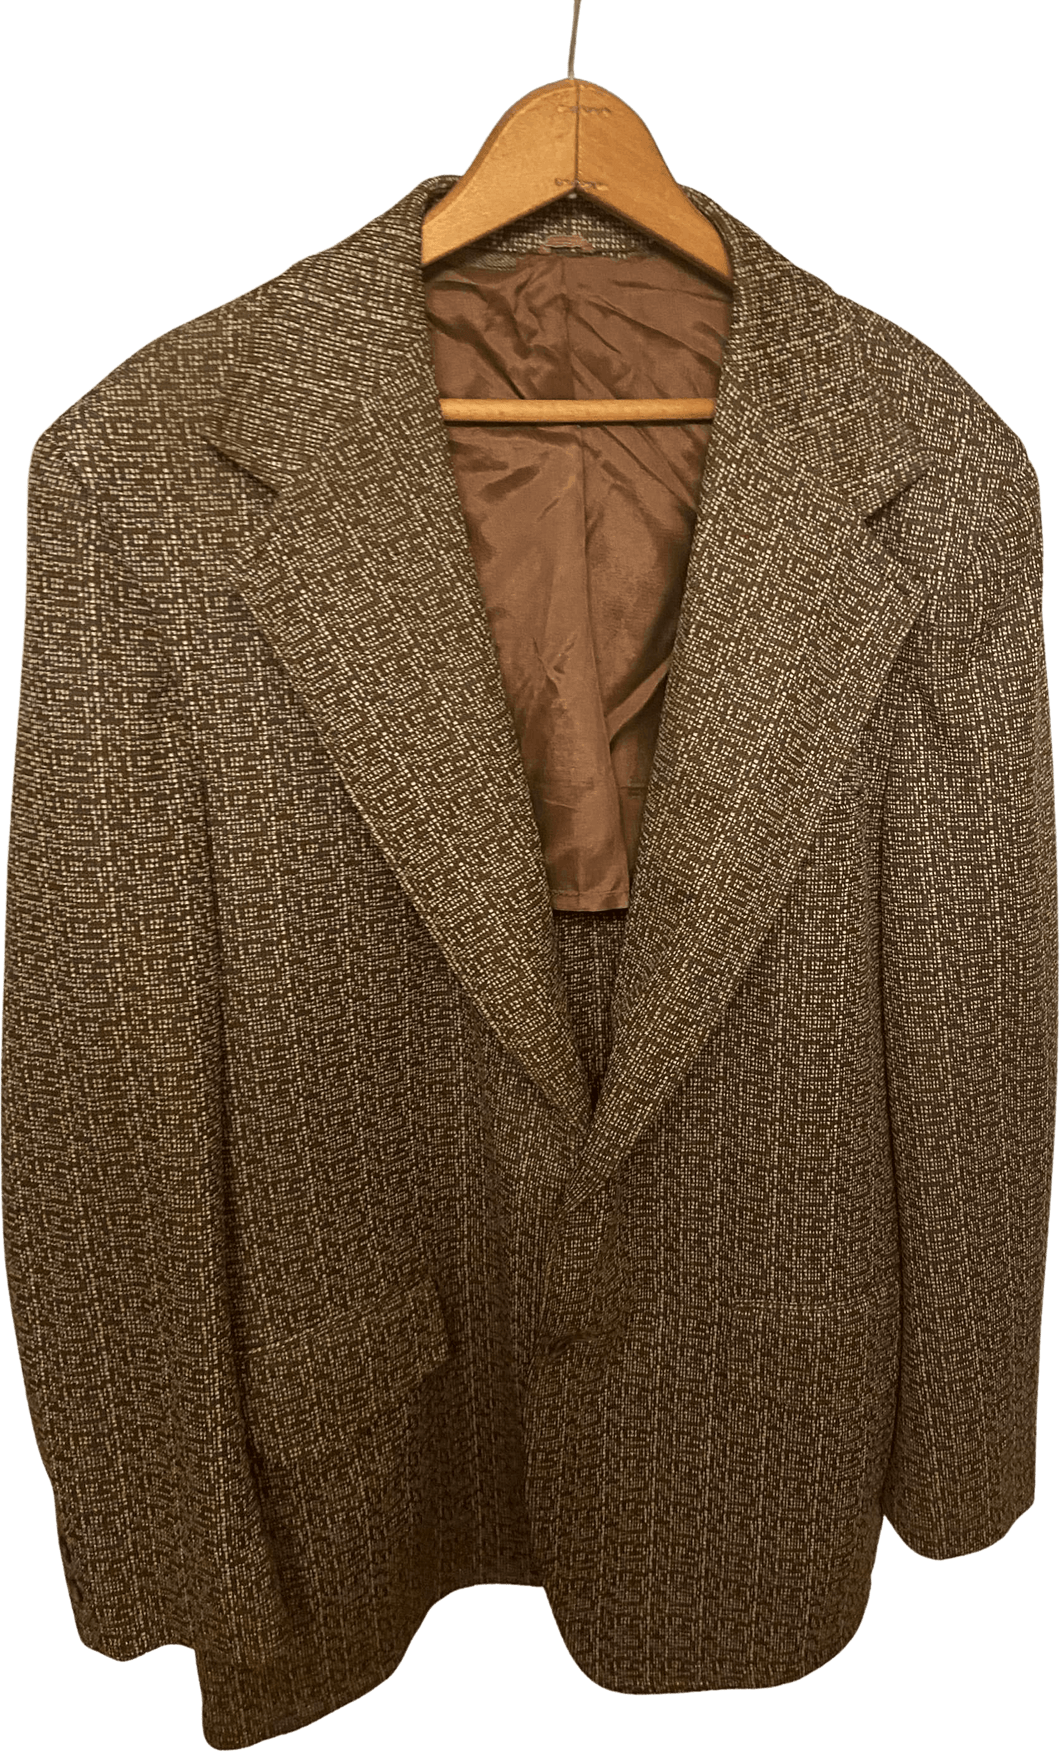 70’s Brown and White Polyester Blazer by Vintage Designer